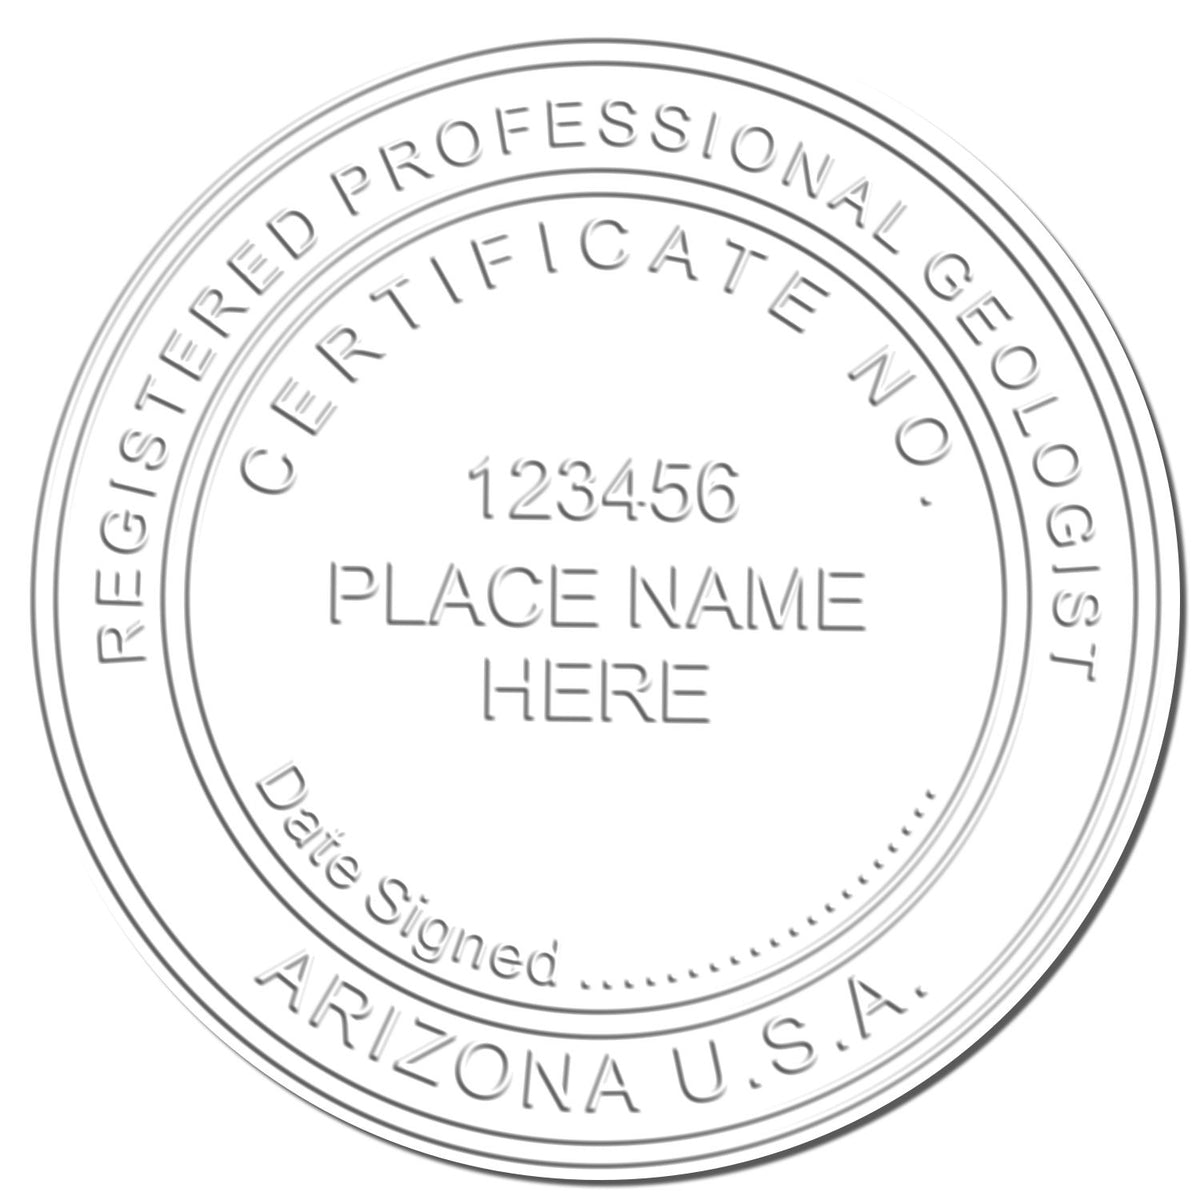 This paper is stamped with a sample imprint of the Handheld Arizona Professional Geologist Embosser, signifying its quality and reliability.